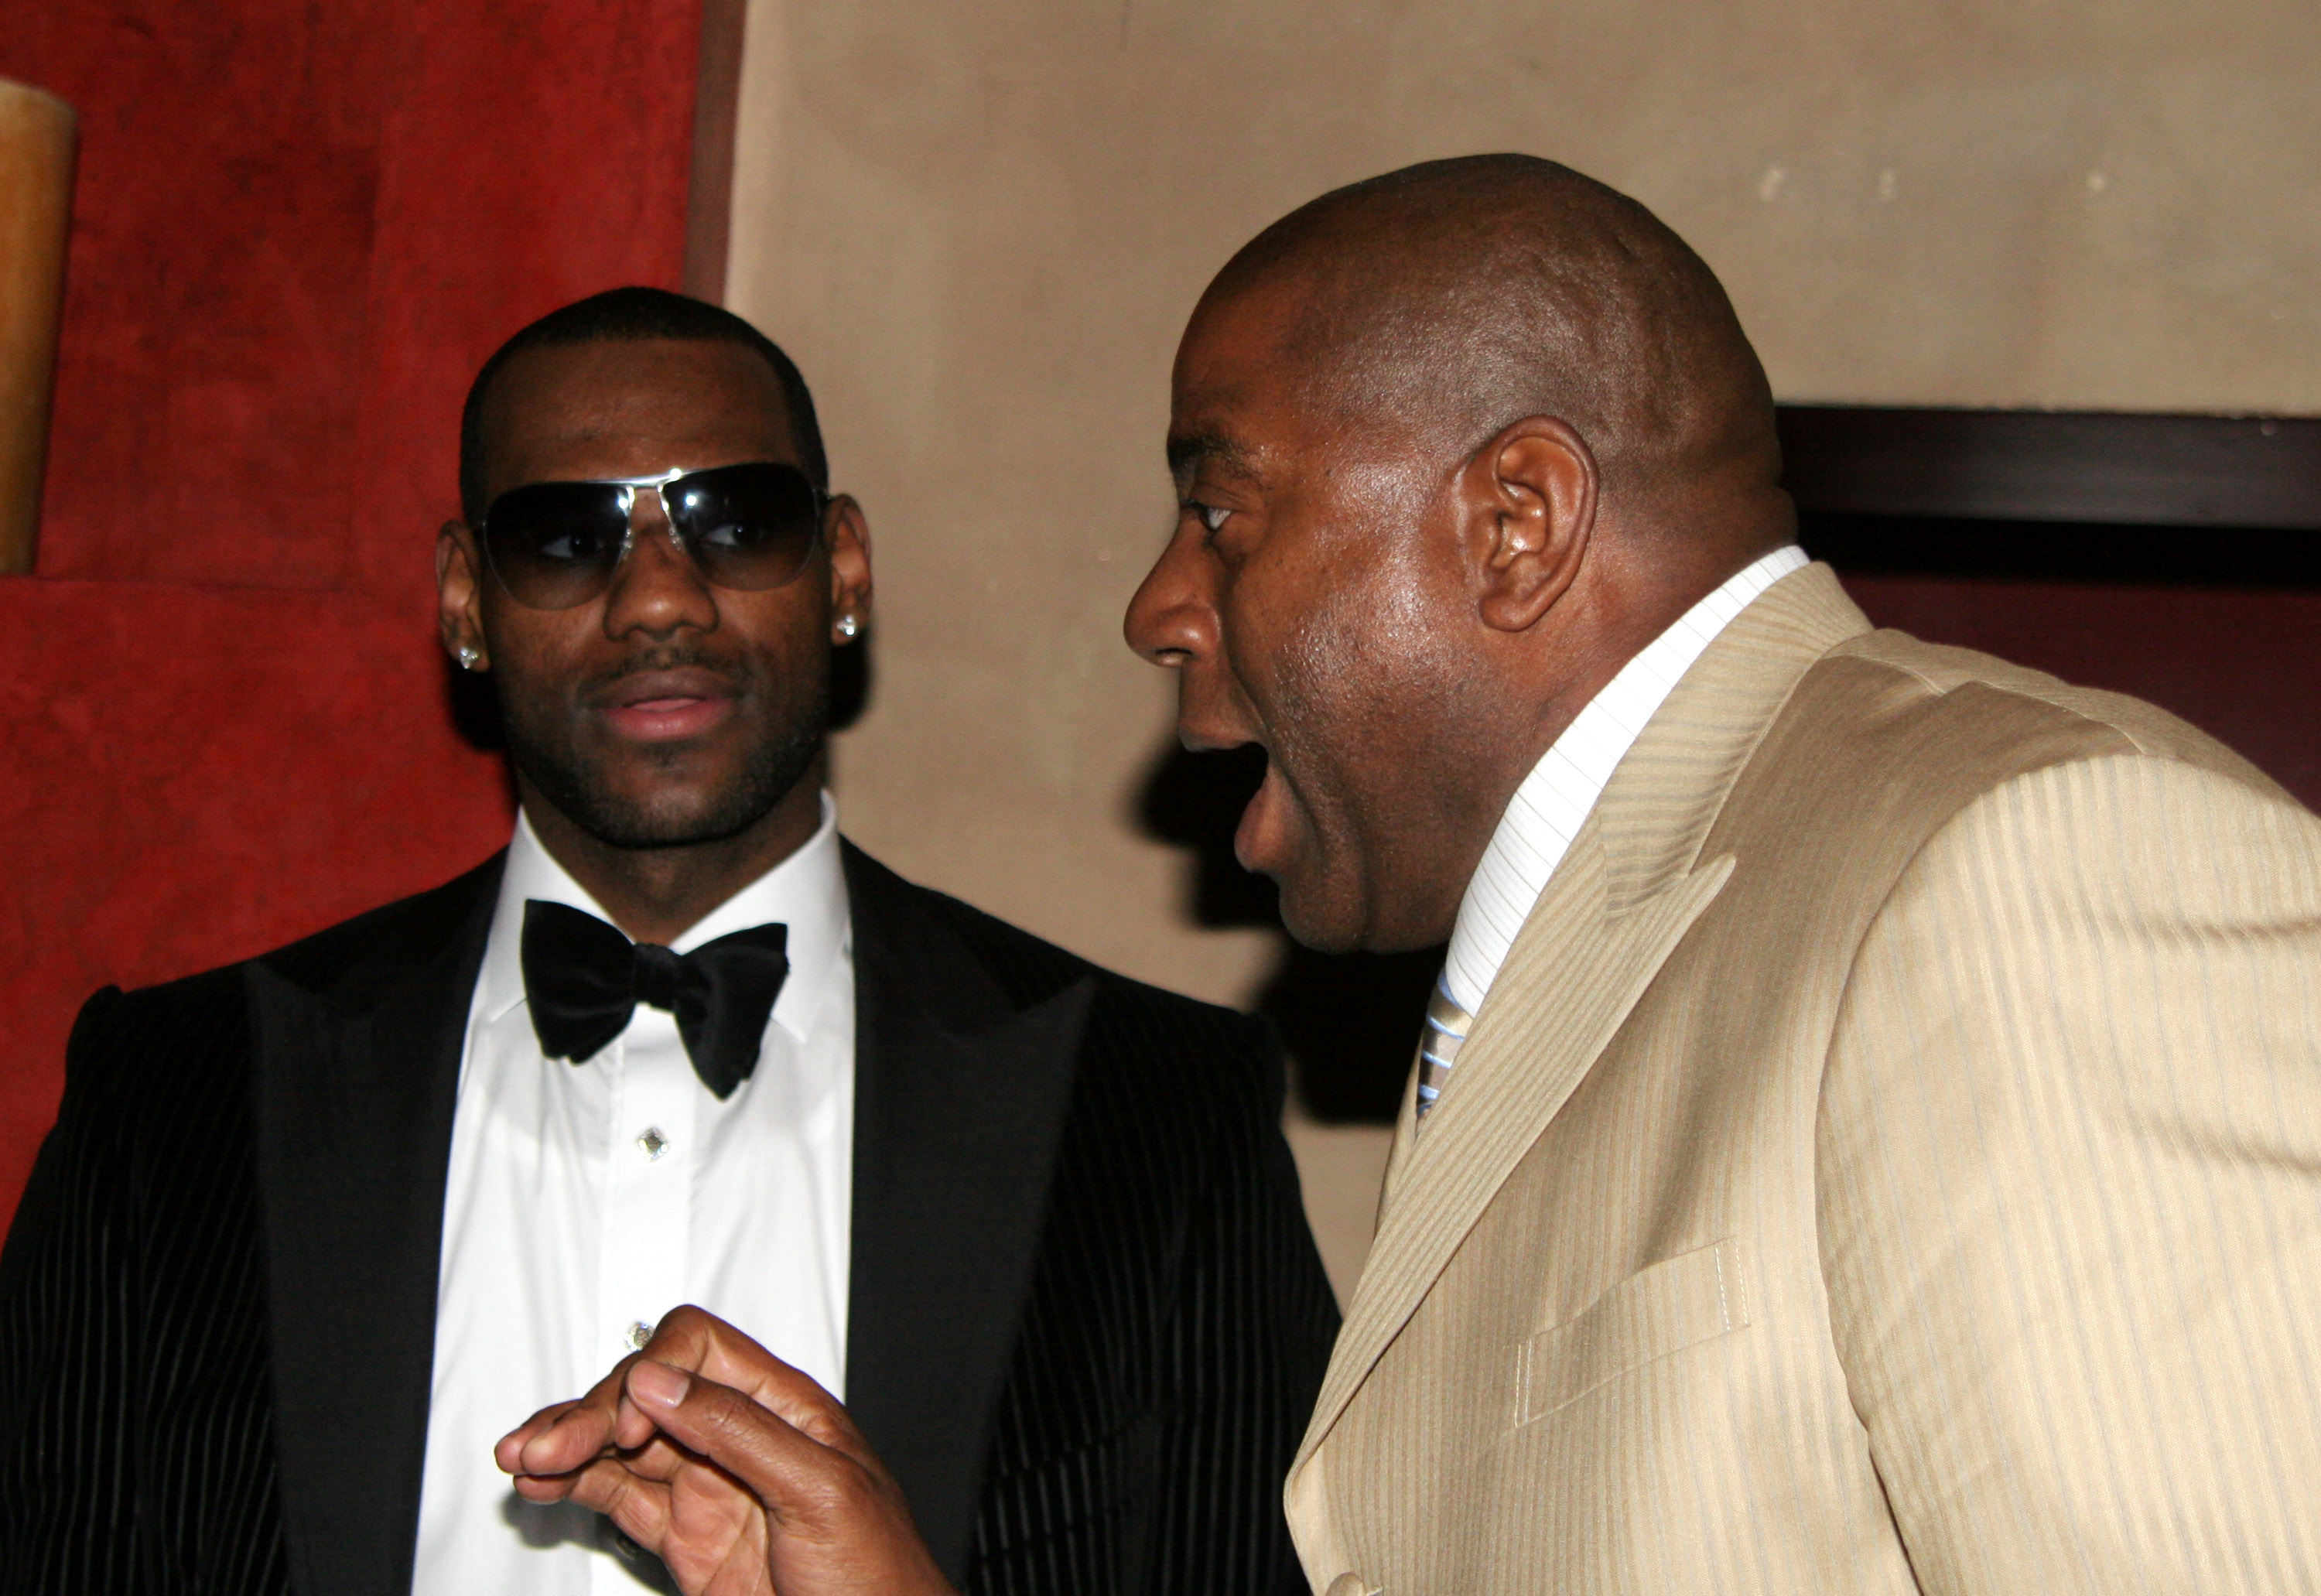 The Story of How Magic Johnson Convinced LeBron to Become a Laker